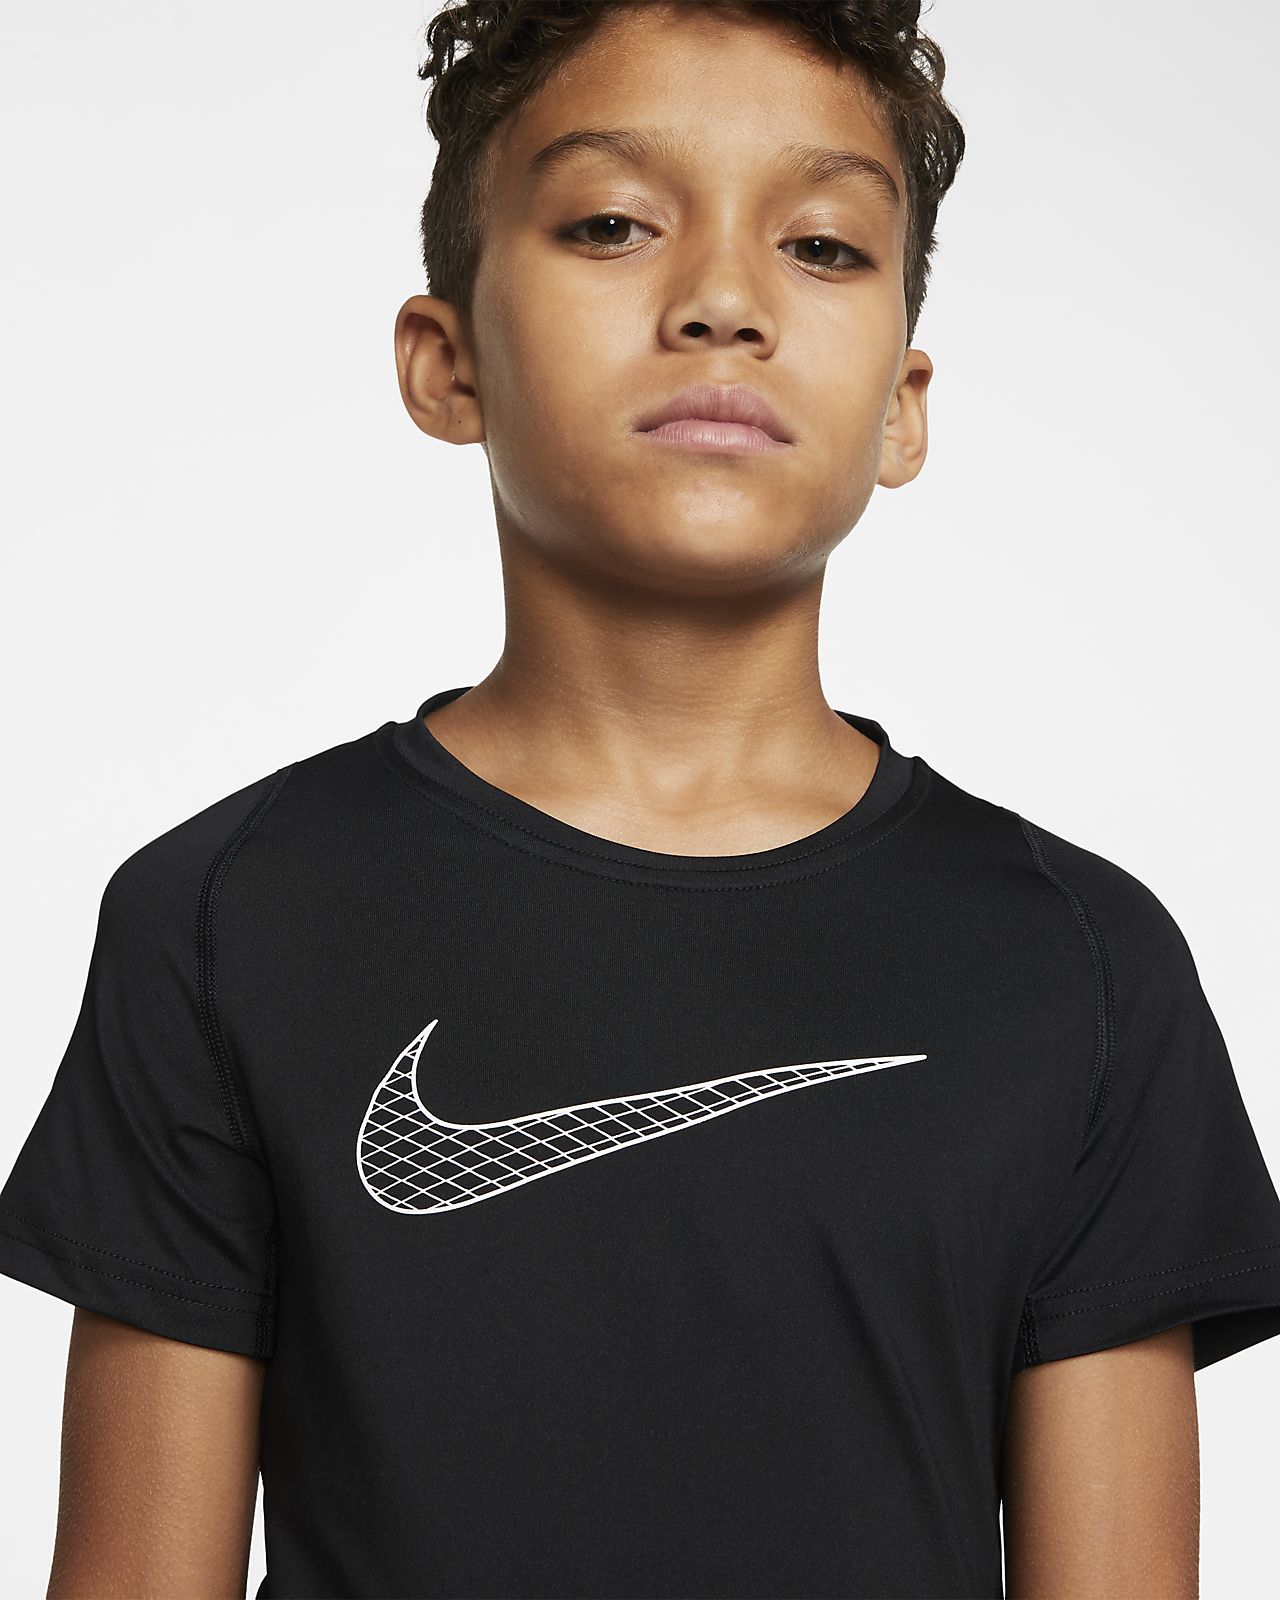 Nike T Shirt Training Sale Up To 67 Discounts - nike t shirt roblox sale up to 67 discounts